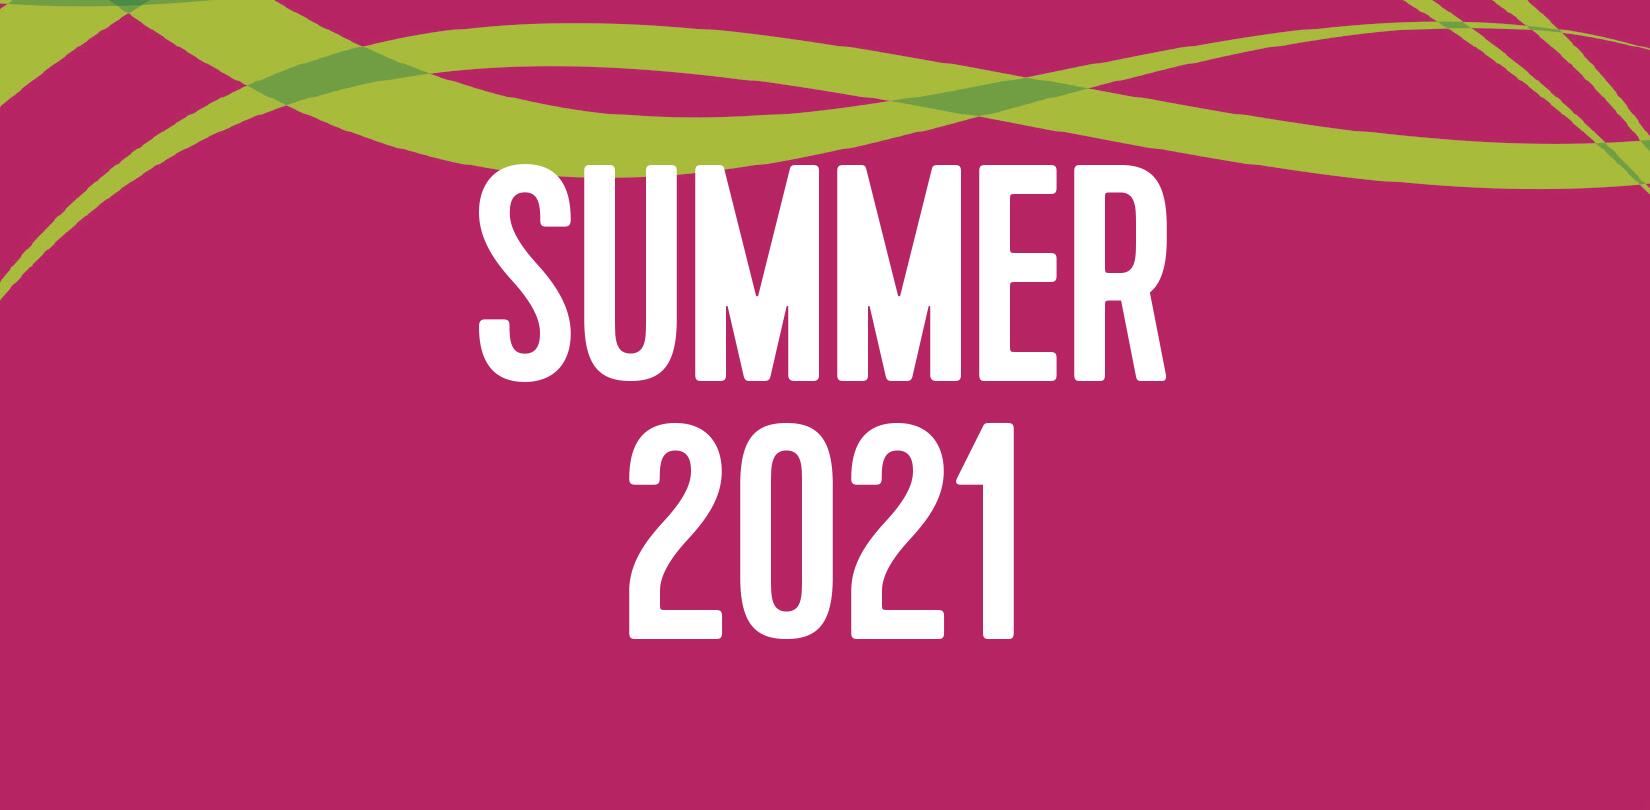 Summer 2021 Banner (though it should be for 2022)